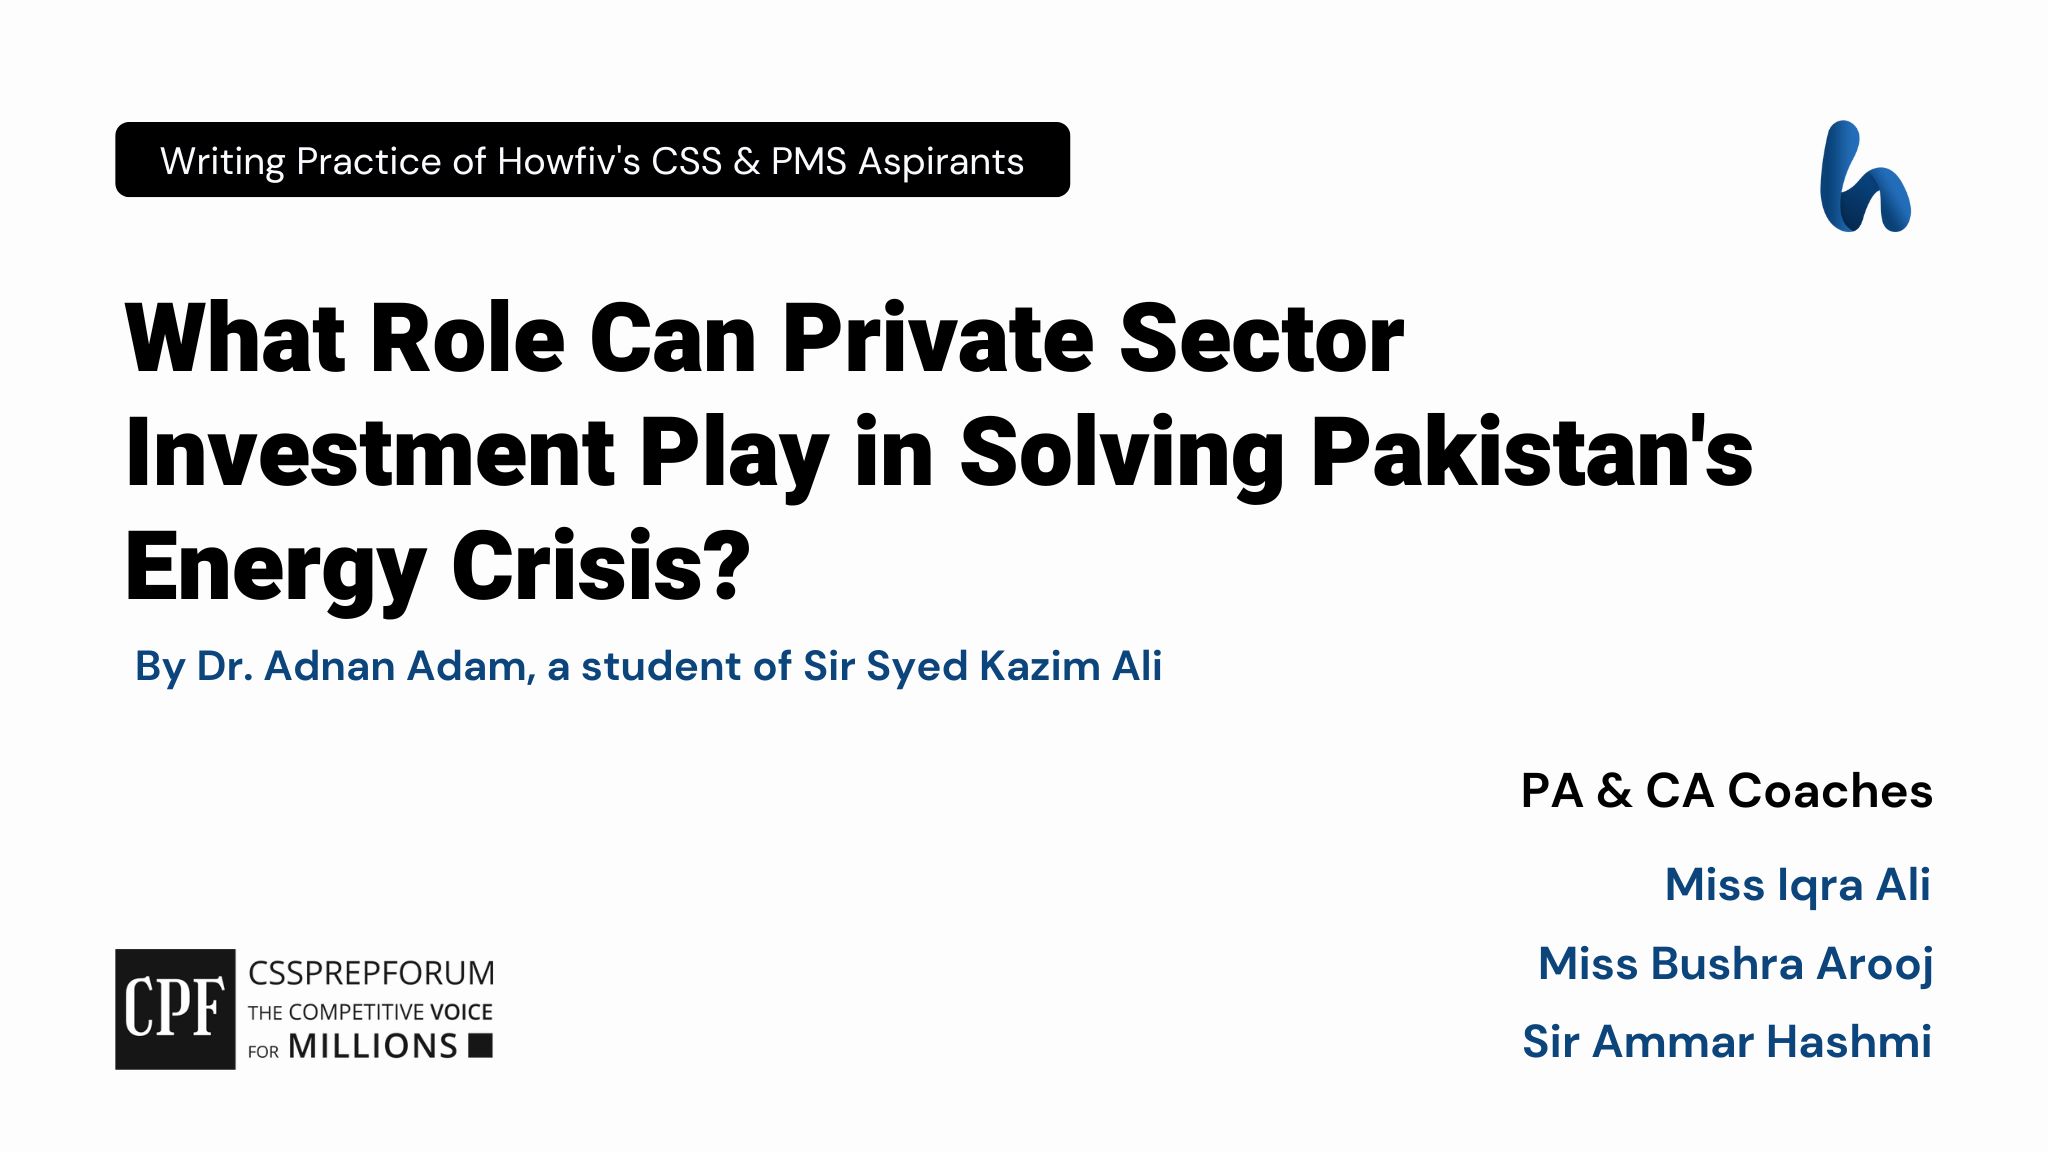 CSS Current Affairs article | Role of Private Sector Investment in Solving Energy Crisis | is written by Dr. Adnan Adam under the supervision of Sir Ammar Hashmi...